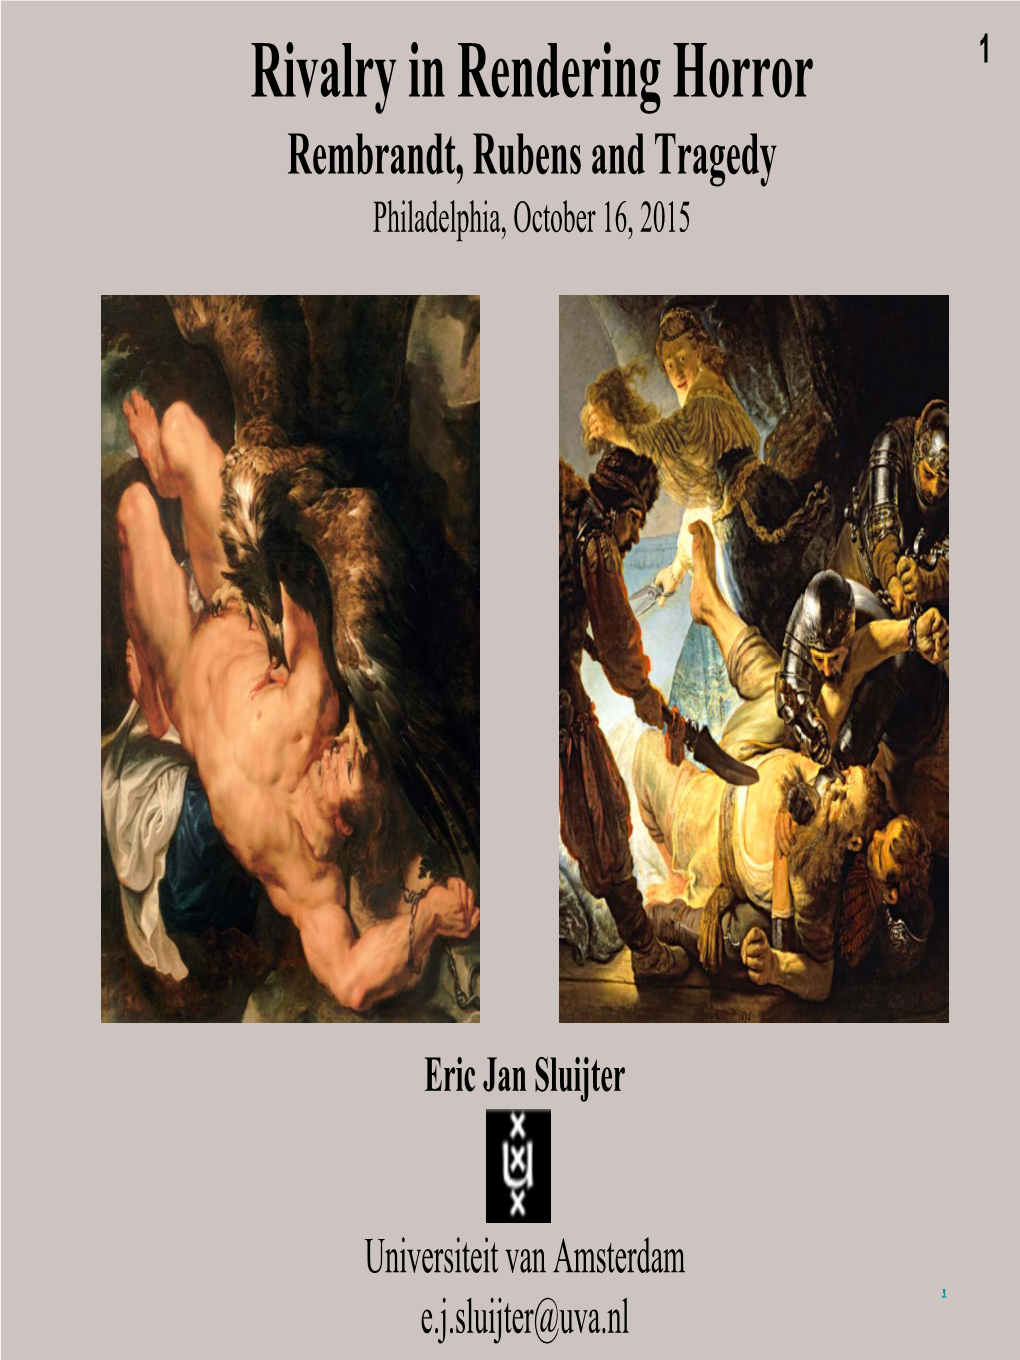 Rivalry in Rendering Horror 1 Rembrandt, Rubens and Tragedy Philadelphia, October 16, 2015